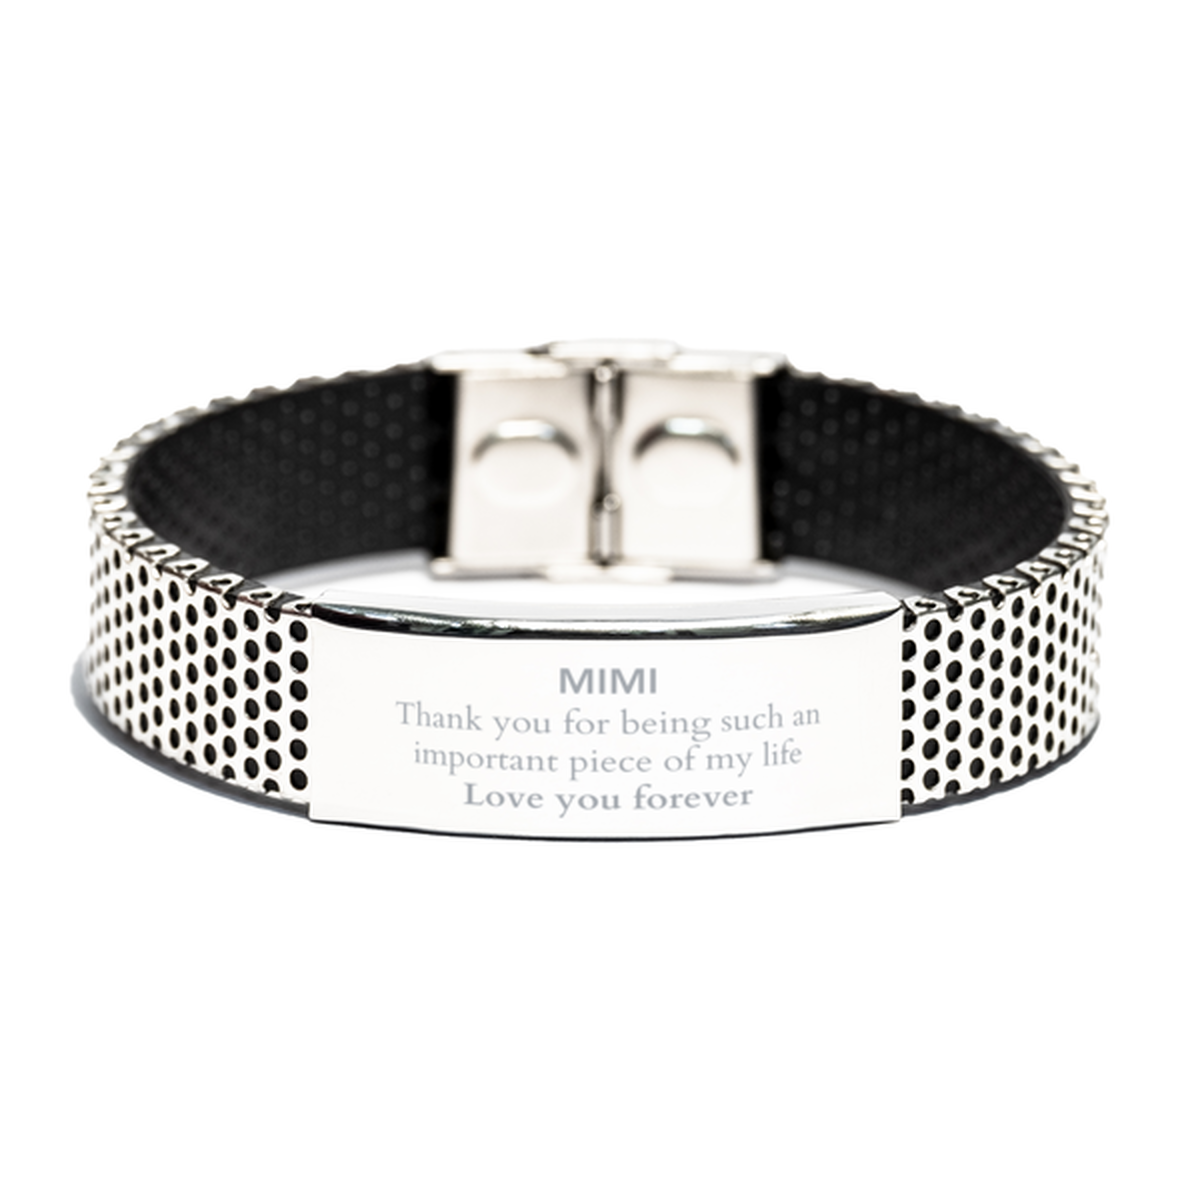 Appropriate Mimi Stainless Steel Bracelet Epic Birthday Gifts for Mimi Thank you for being such an important piece of my life Mimi Christmas Mothers Fathers Day